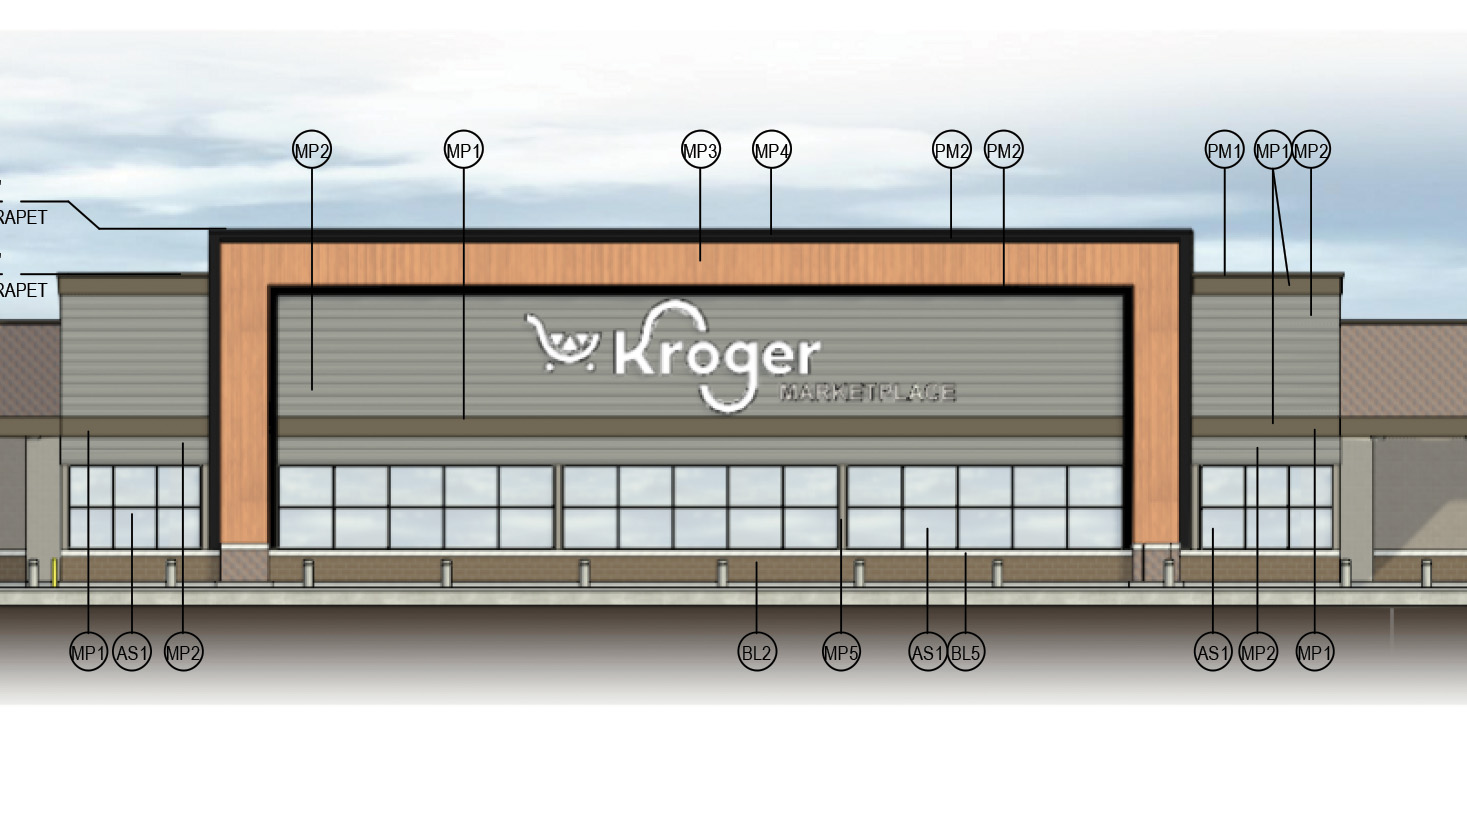 New Kroger for Fishers feat